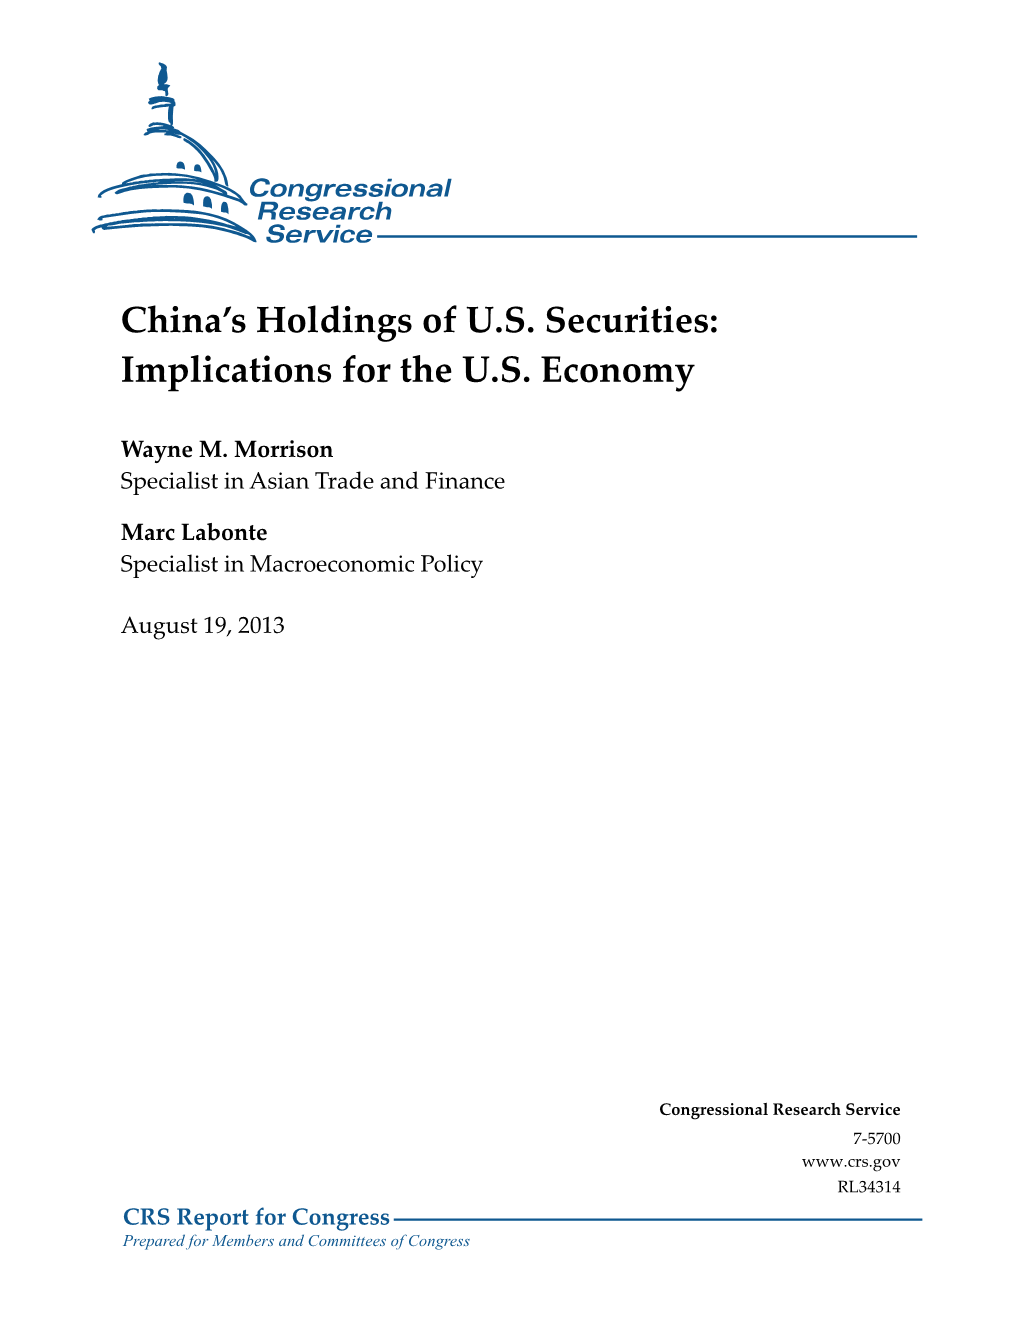 China's Holdings of U.S. Securities: Implications for the U.S. Economy